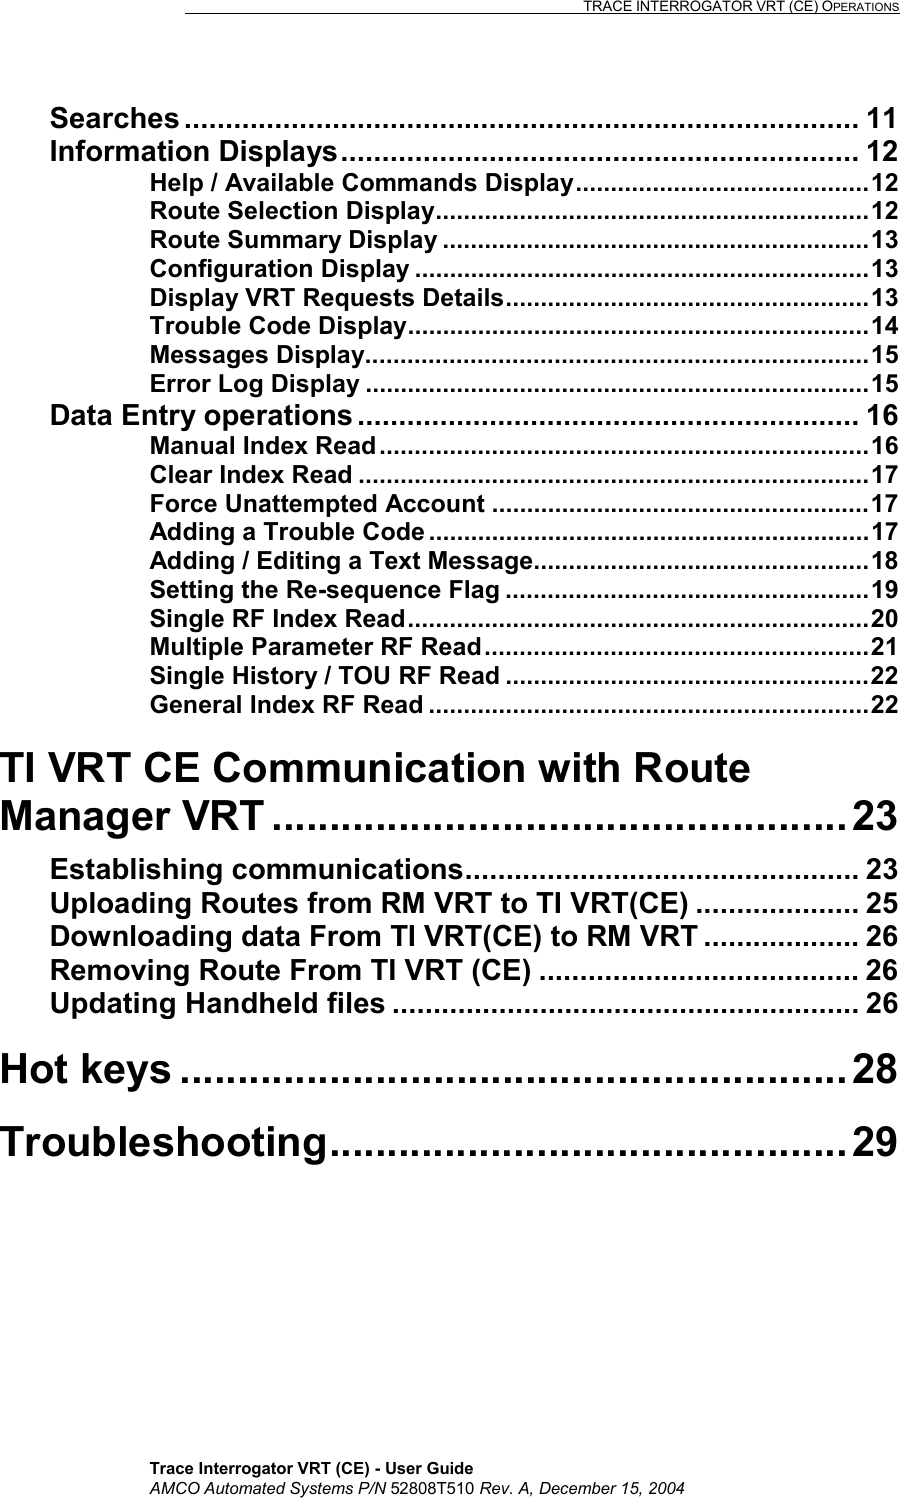                                                                                                                              TRACE INTERROGATOR VRT (CE) OPERATIONS    Trace Interrogator VRT (CE) - User Guide AMCO Automated Systems P/N 52808T510 Rev. A, December 15, 2004 Searches .................................................................................. 11 Information Displays............................................................... 12 Help / Available Commands Display..........................................12 Route Selection Display..............................................................12 Route Summary Display .............................................................13 Configuration Display .................................................................13 Display VRT Requests Details....................................................13 Trouble Code Display..................................................................14 Messages Display........................................................................15 Error Log Display ........................................................................15 Data Entry operations............................................................. 16 Manual Index Read......................................................................16 Clear Index Read .........................................................................17 Force Unattempted Account ......................................................17 Adding a Trouble Code ...............................................................17 Adding / Editing a Text Message................................................18 Setting the Re-sequence Flag ....................................................19 Single RF Index Read..................................................................20 Multiple Parameter RF Read.......................................................21 Single History / TOU RF Read ....................................................22 General Index RF Read ...............................................................22 TI VRT CE Communication with Route Manager VRT .................................................. 23 Establishing communications................................................ 23 Uploading Routes from RM VRT to TI VRT(CE) .................... 25 Downloading data From TI VRT(CE) to RM VRT ................... 26 Removing Route From TI VRT (CE) ....................................... 26 Updating Handheld files ......................................................... 26 Hot keys .......................................................... 28 Troubleshooting............................................. 29 